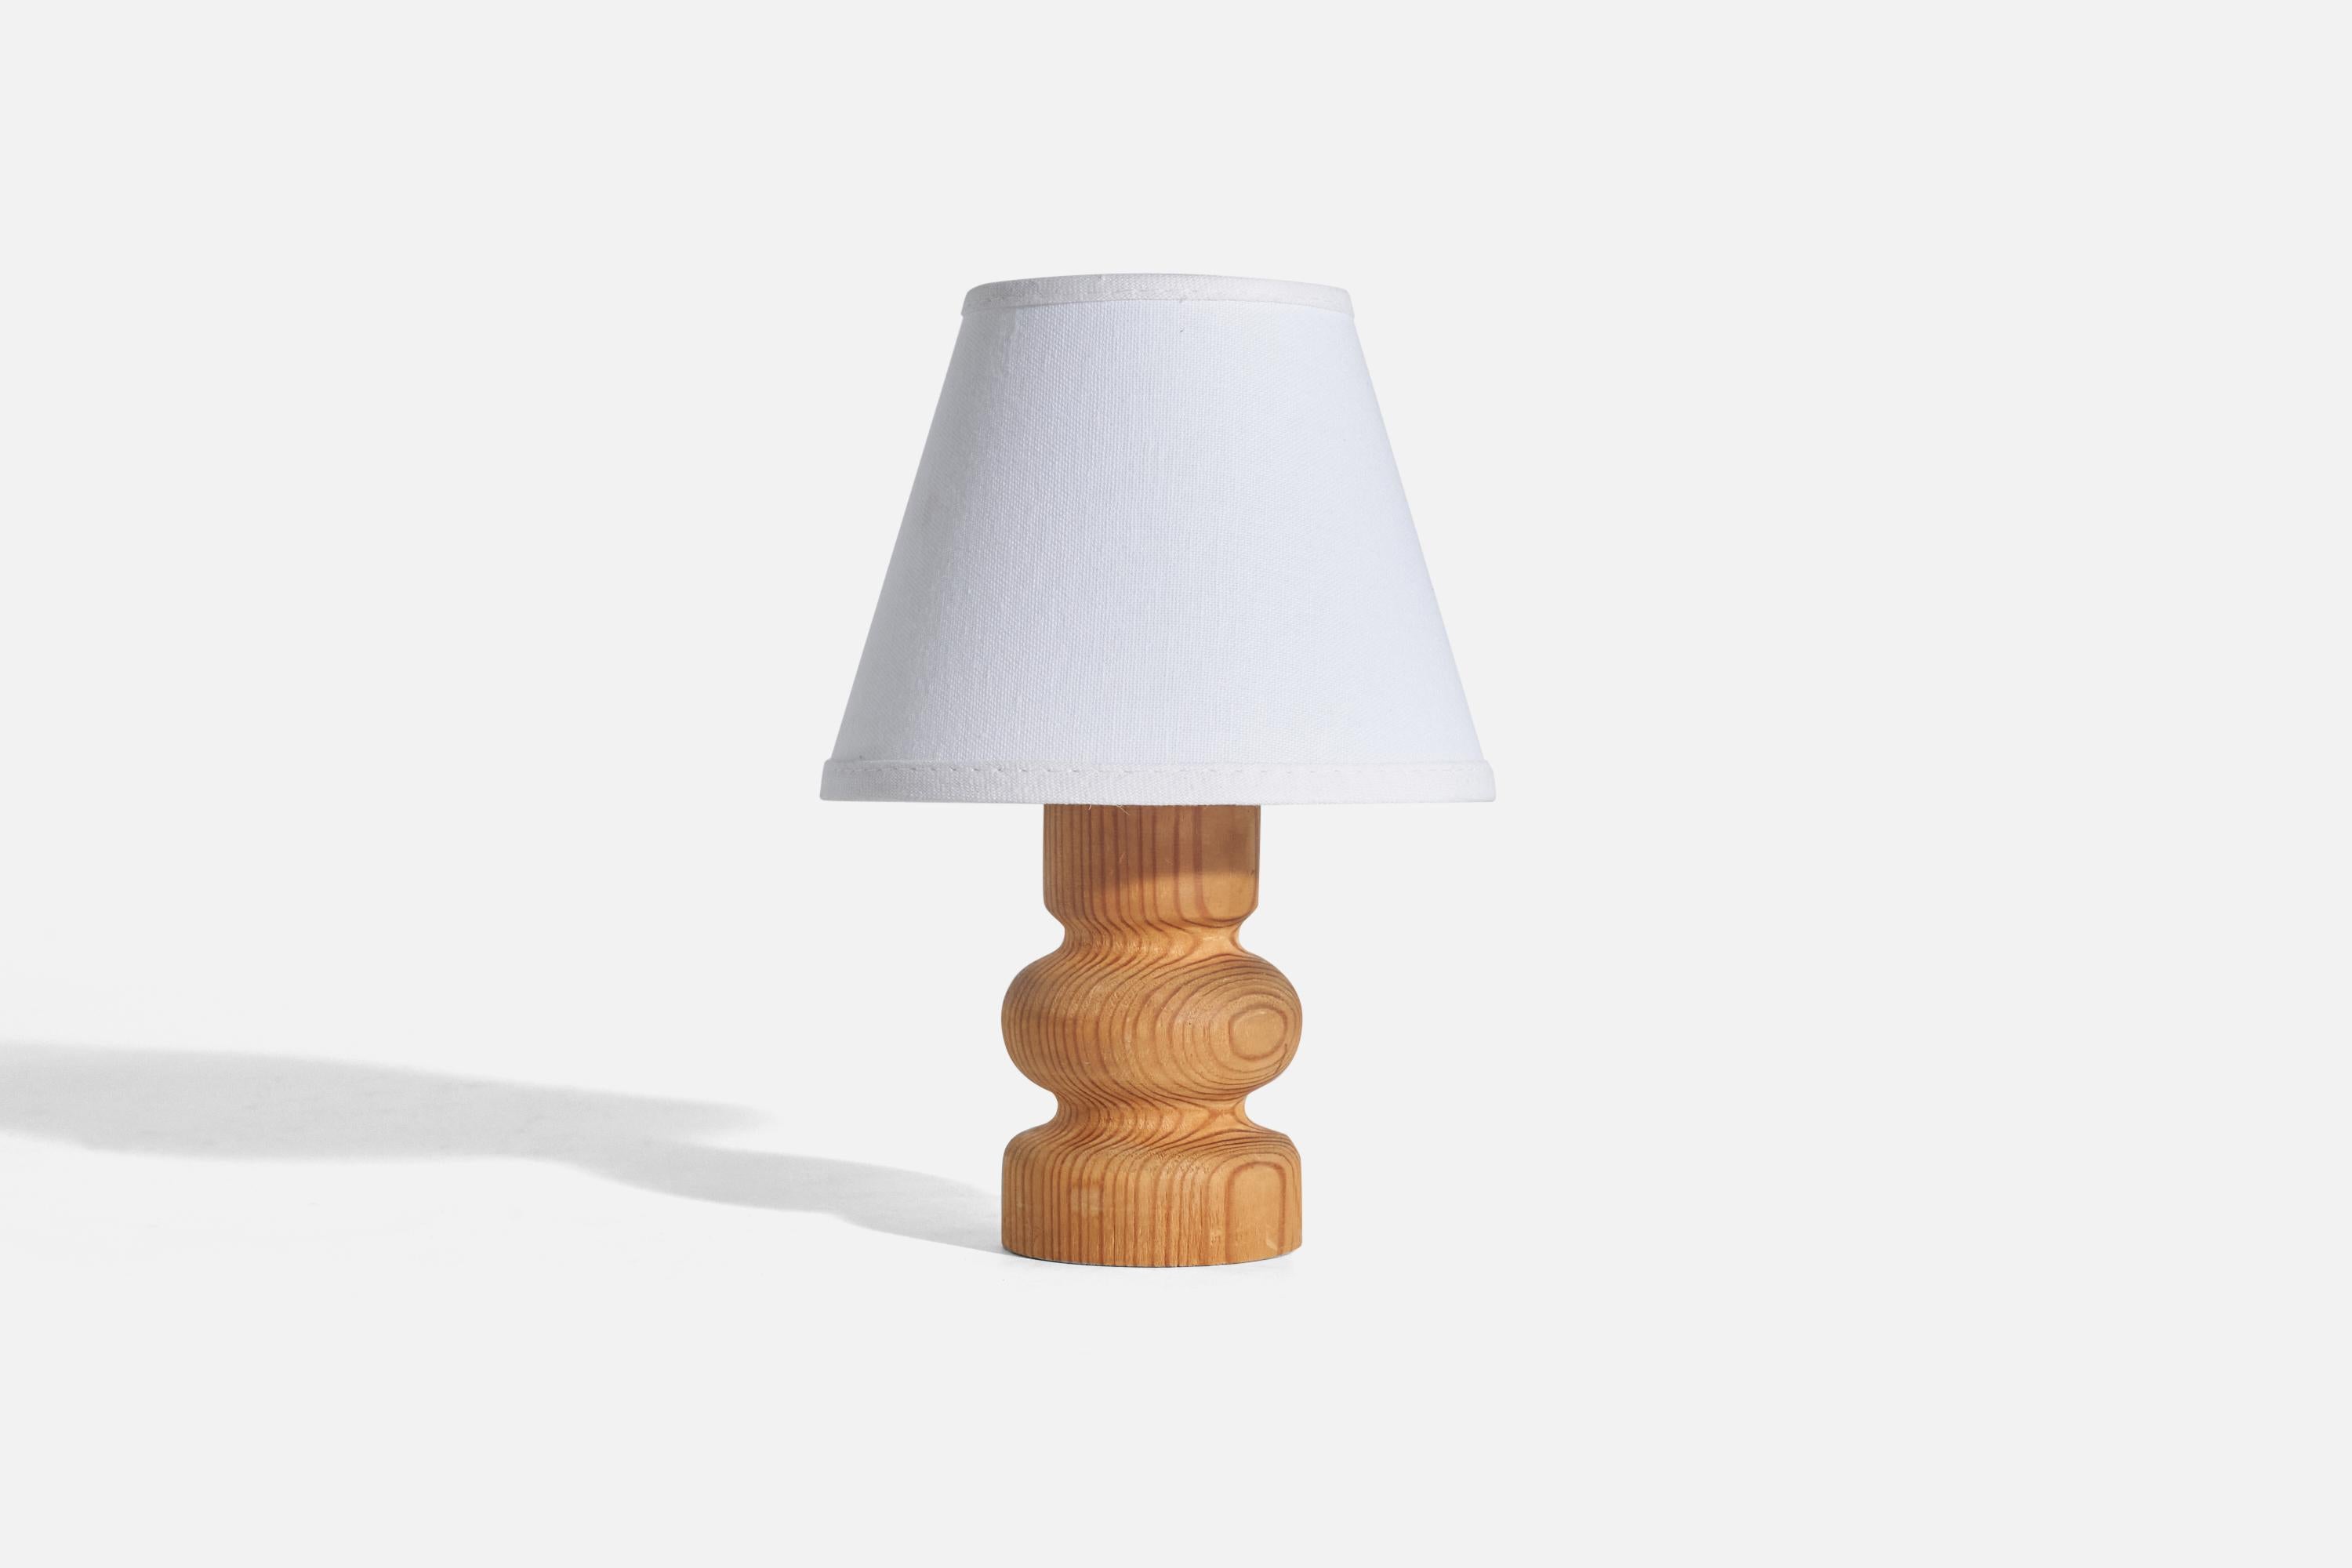 A pine table lamp designed and produced in Sweden, 1970s.

Sold without lampshade(s)
Dimensions of lamp (inches) : 6.12 x 2.6 x 2.6 (Height x Width x Depth)
Dimensions of shade (inches) : 3.25 x 5.75 x 4.56 (Top Diameter x Bottom Diameter x